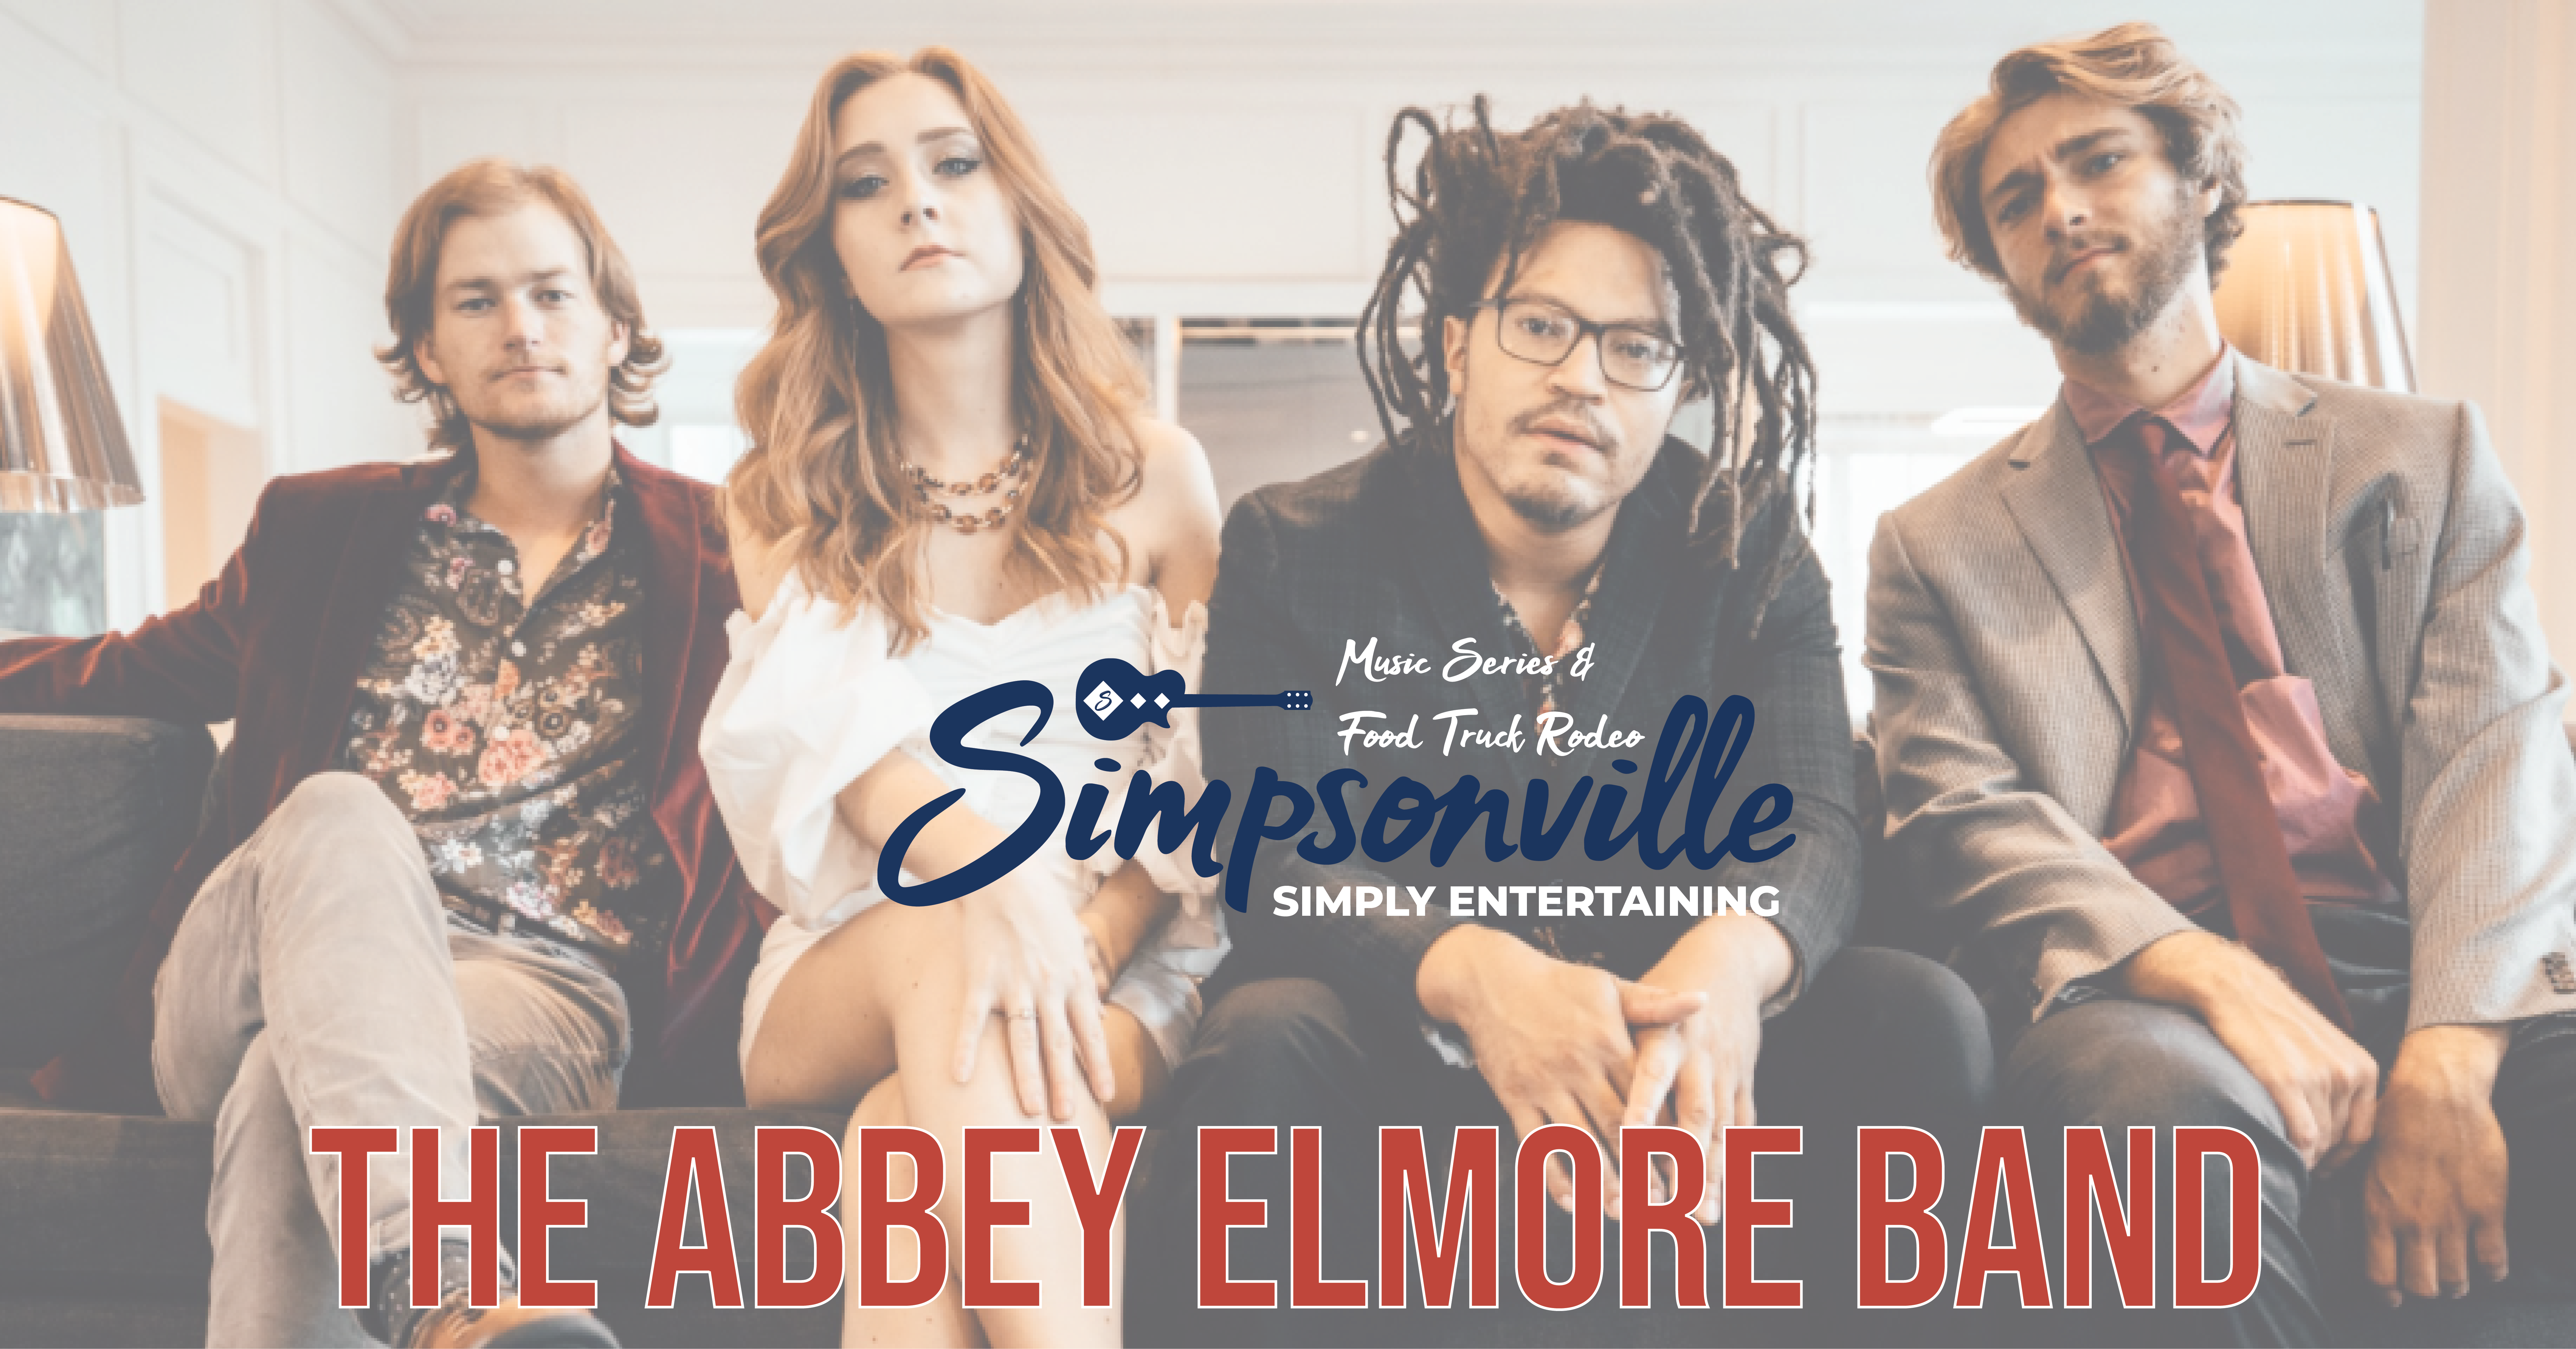 The Abbey Elmore Band Event Page